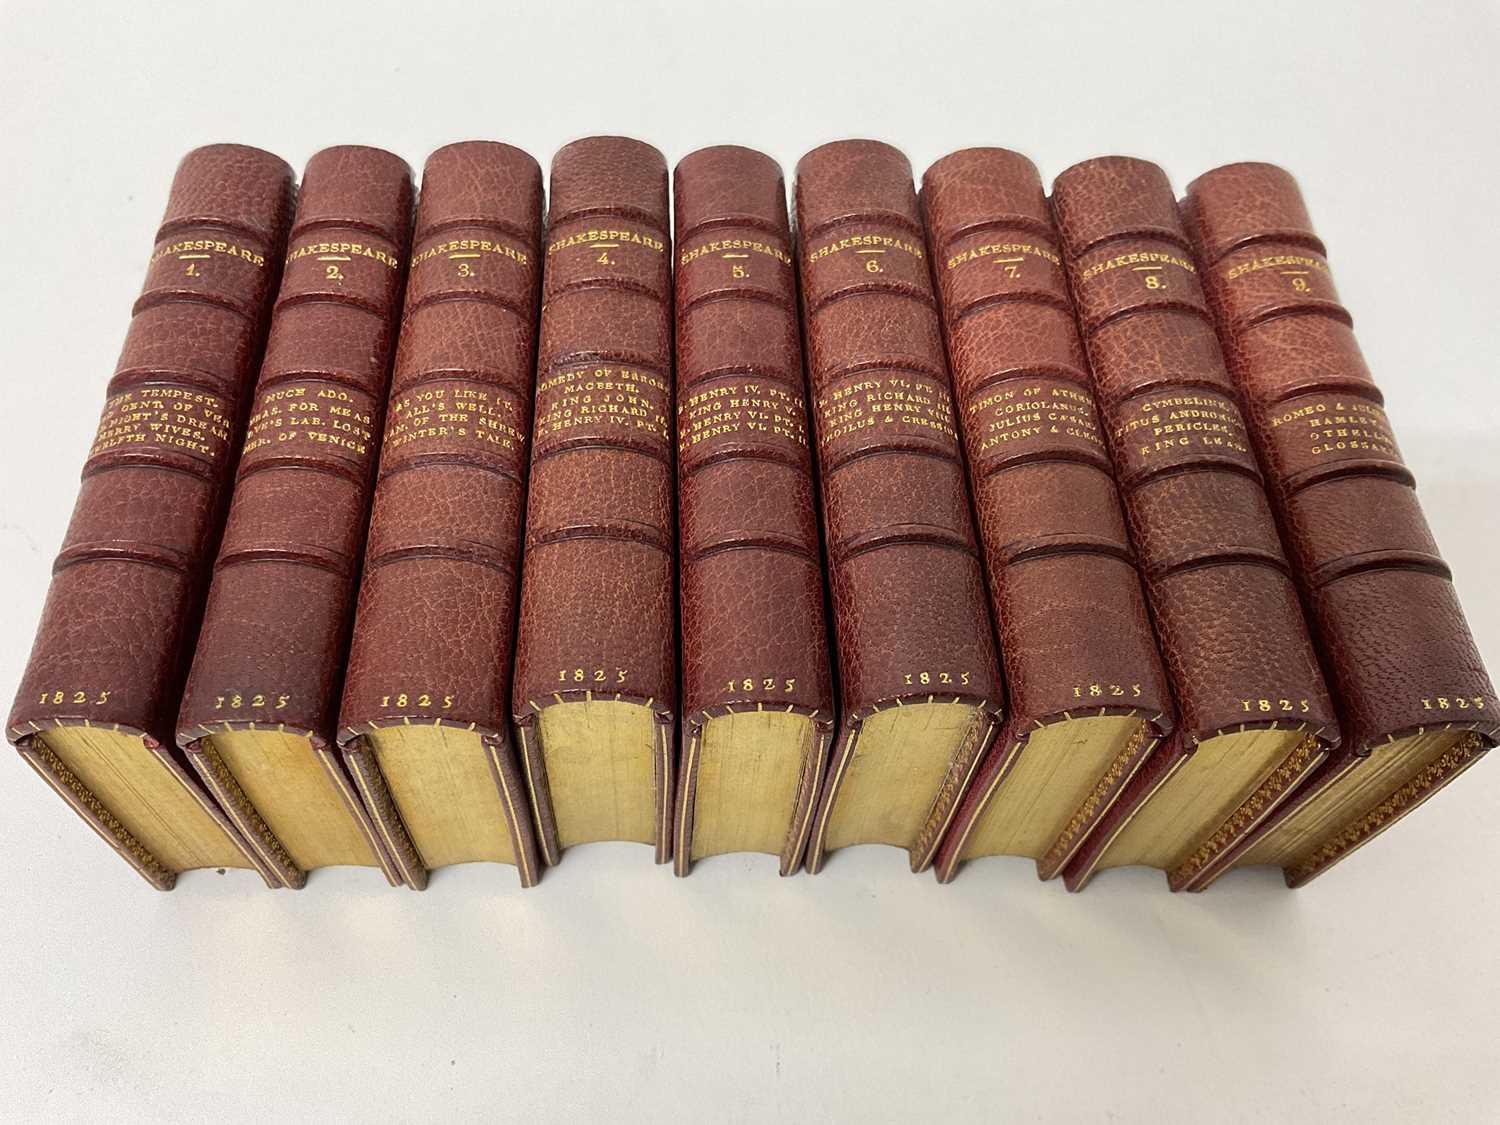 Lot 1726 - William Shakespeare - The Plays, complete set of nine miniature books, approx 85 x 48mm, published London, 1825, in fine full calf bindings